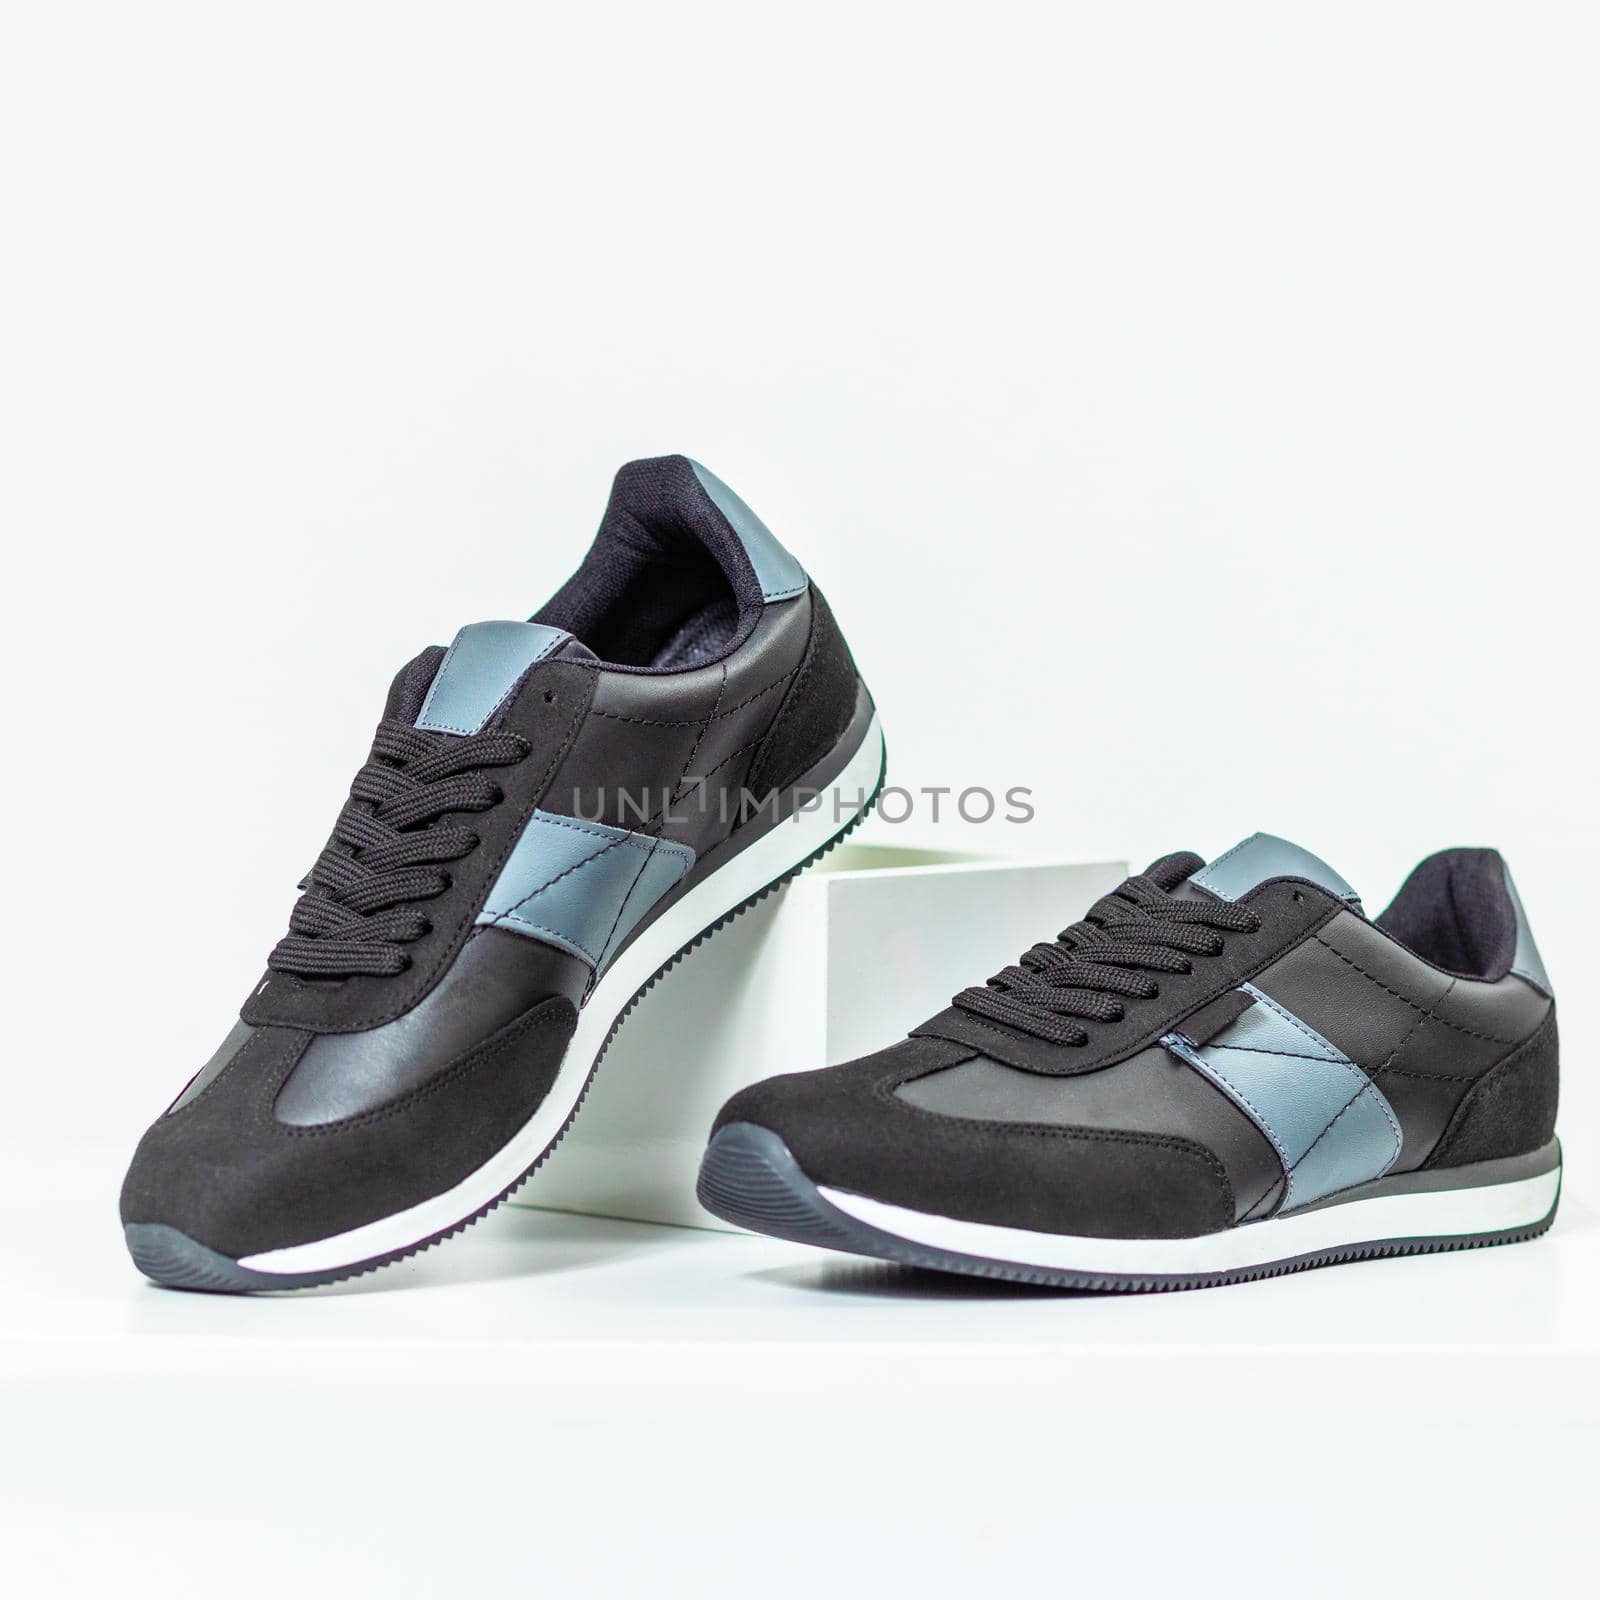 Black male sneakers shoes isolated background